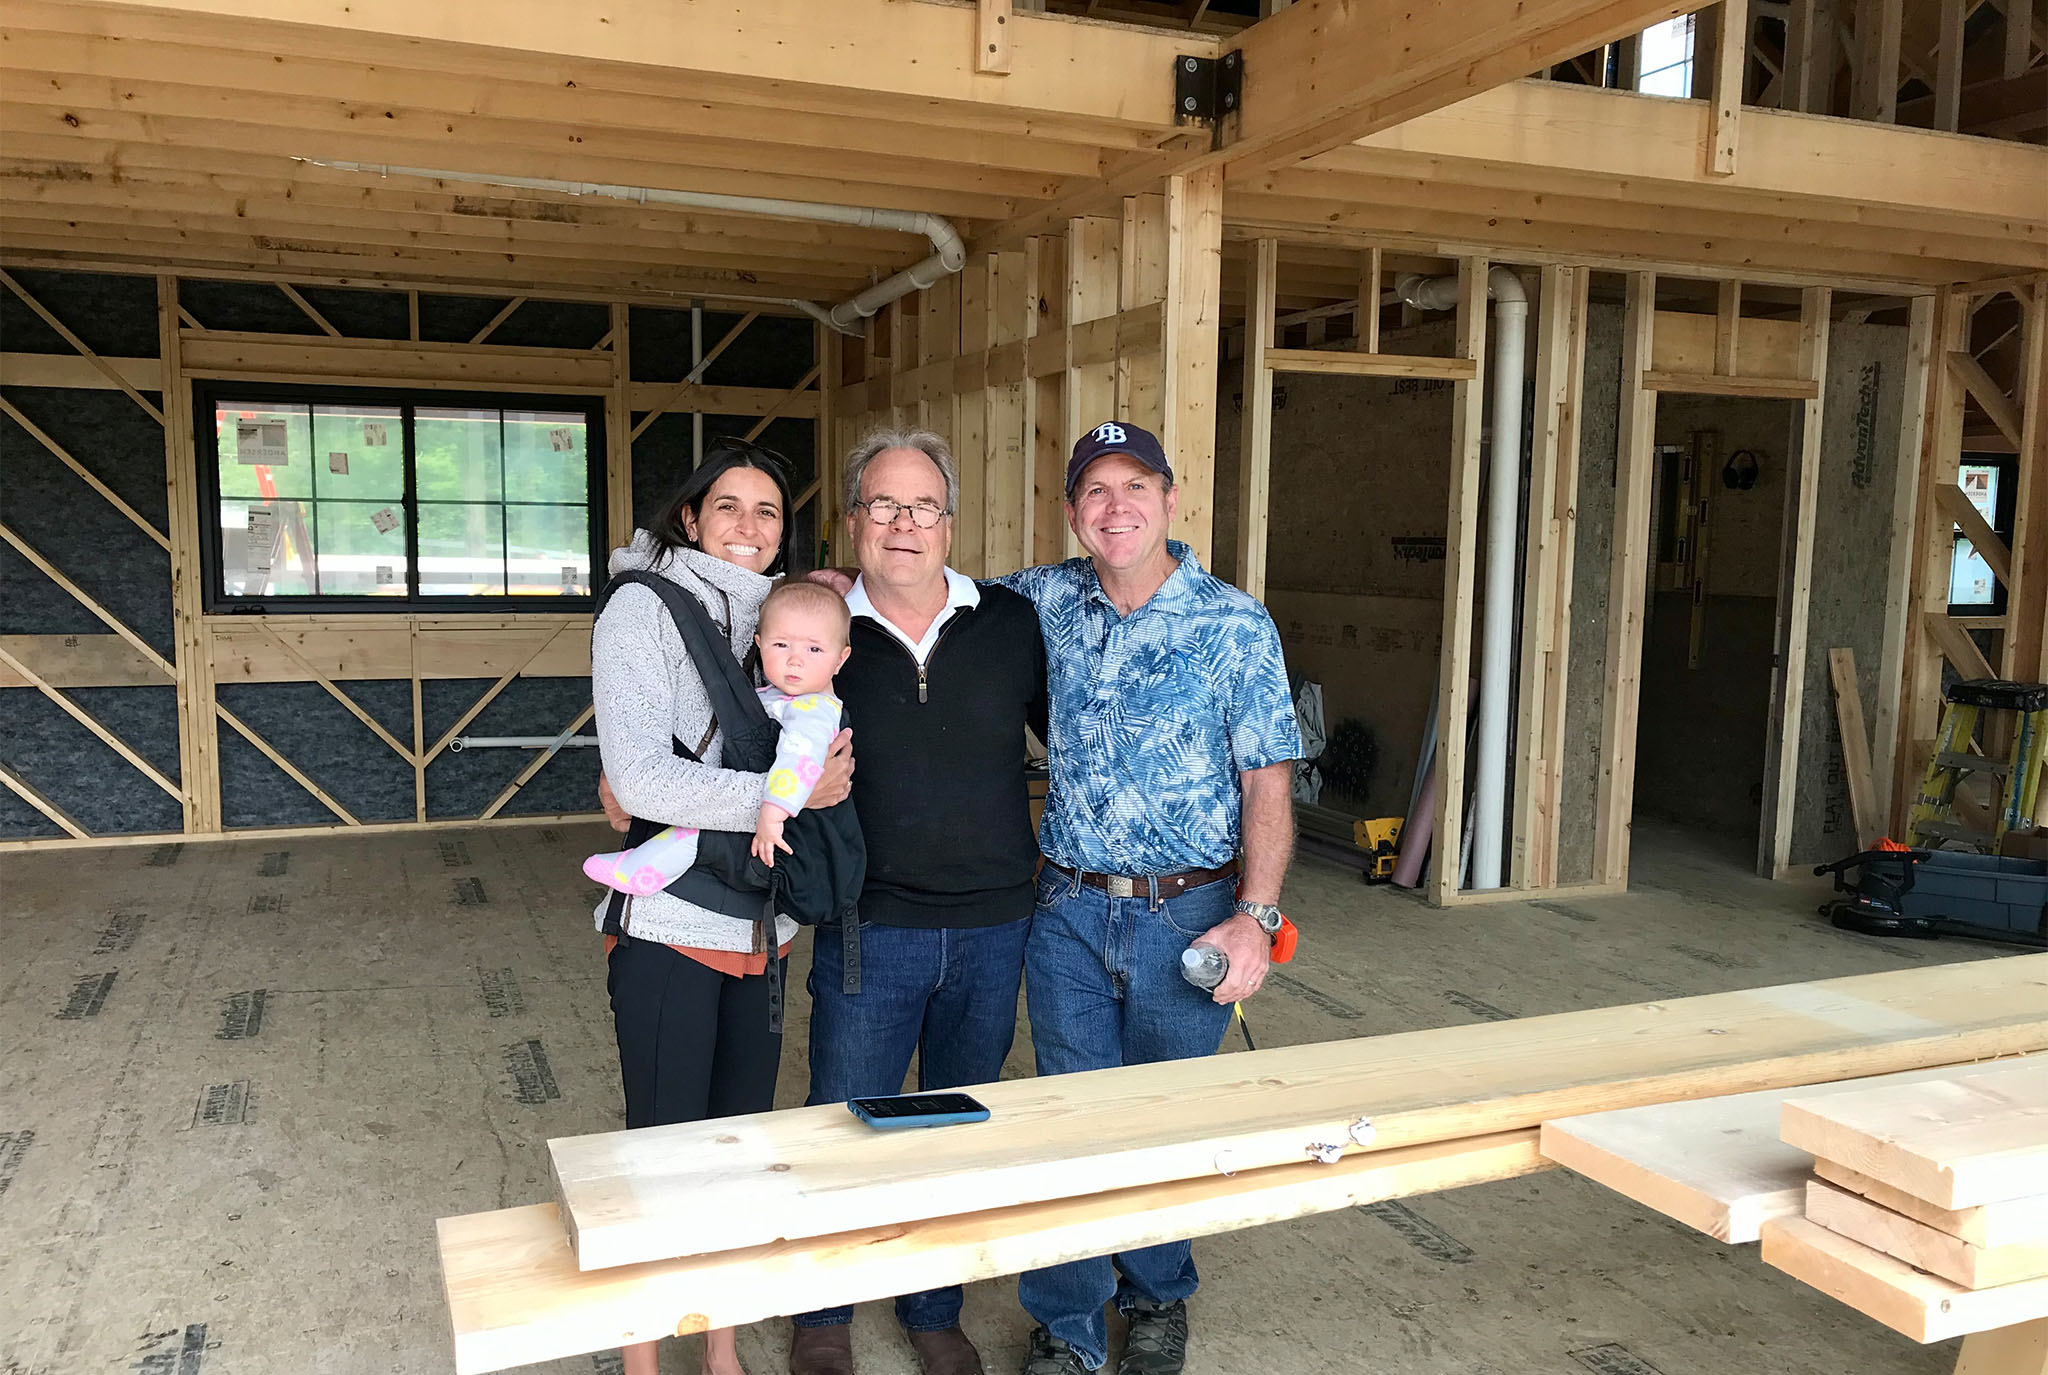 George Abetti of Geobarns meeting on site with clients to inspect construction progress.